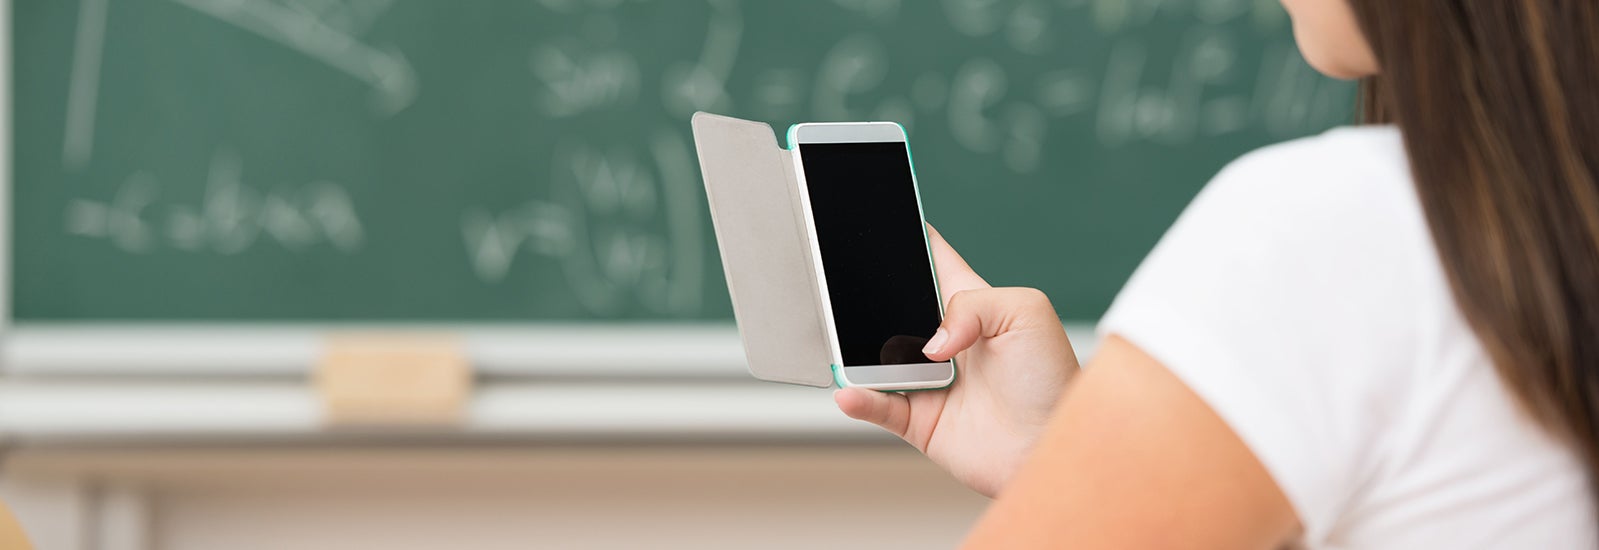 Student holding an iPhone